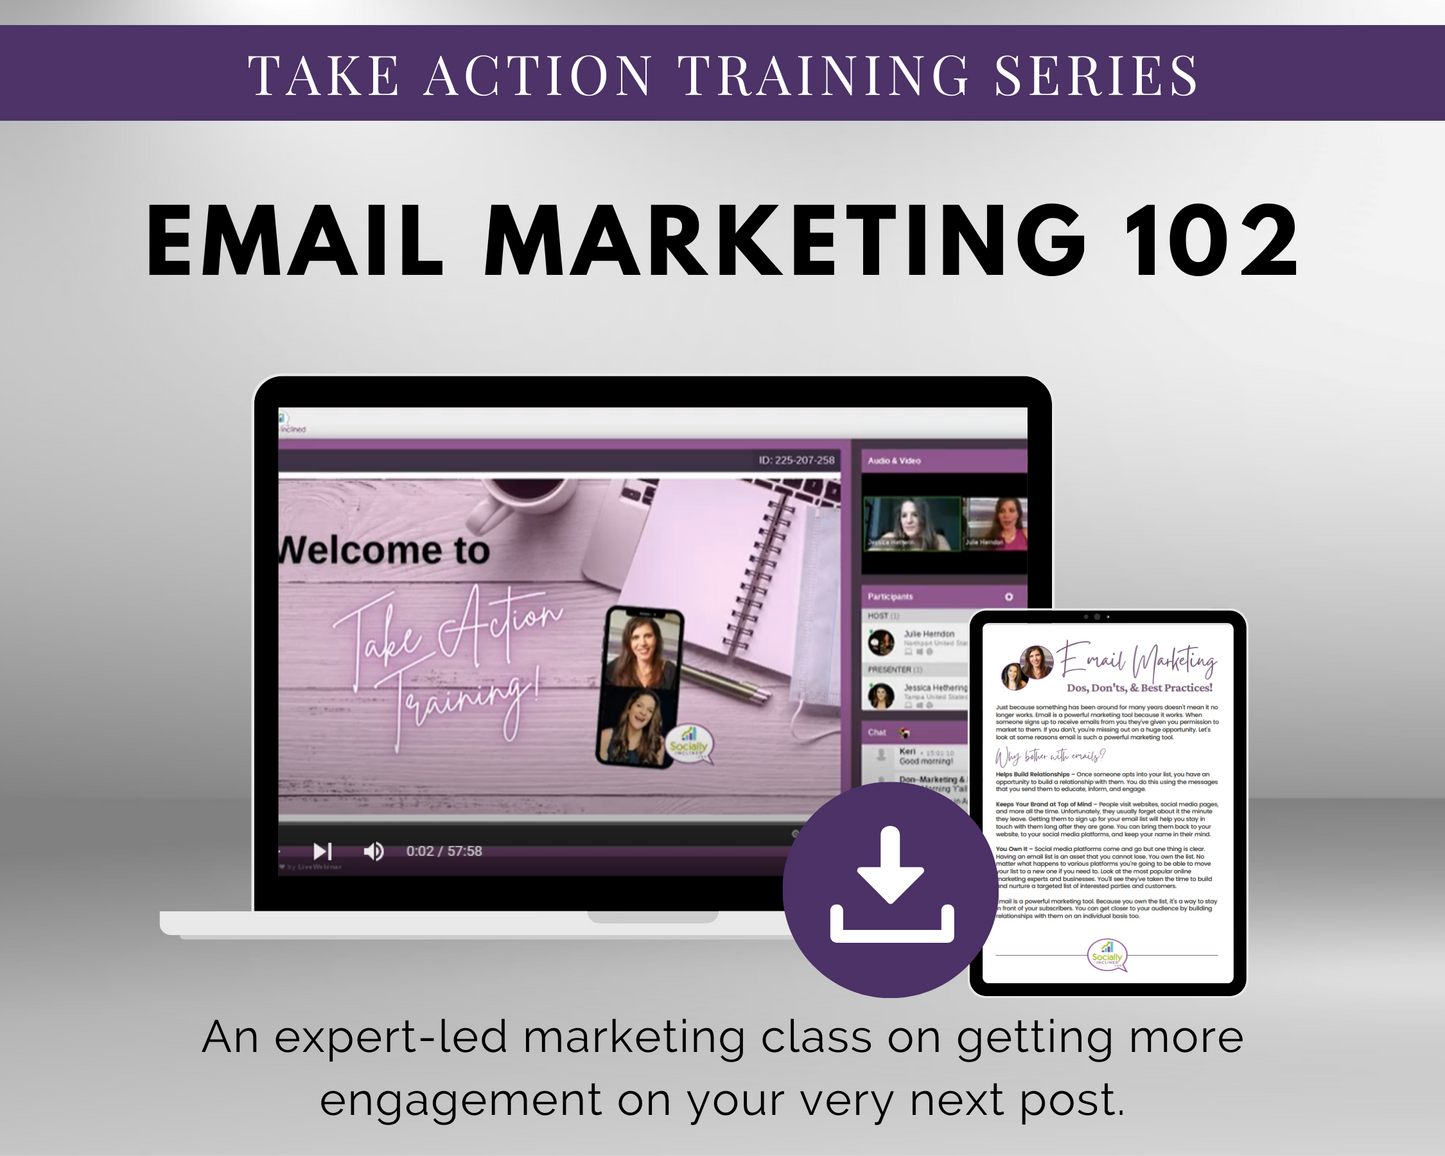 Improve your email marketing with our training series, TAT - Email Marketing 102 Masterclass by Get Socially Inclined.